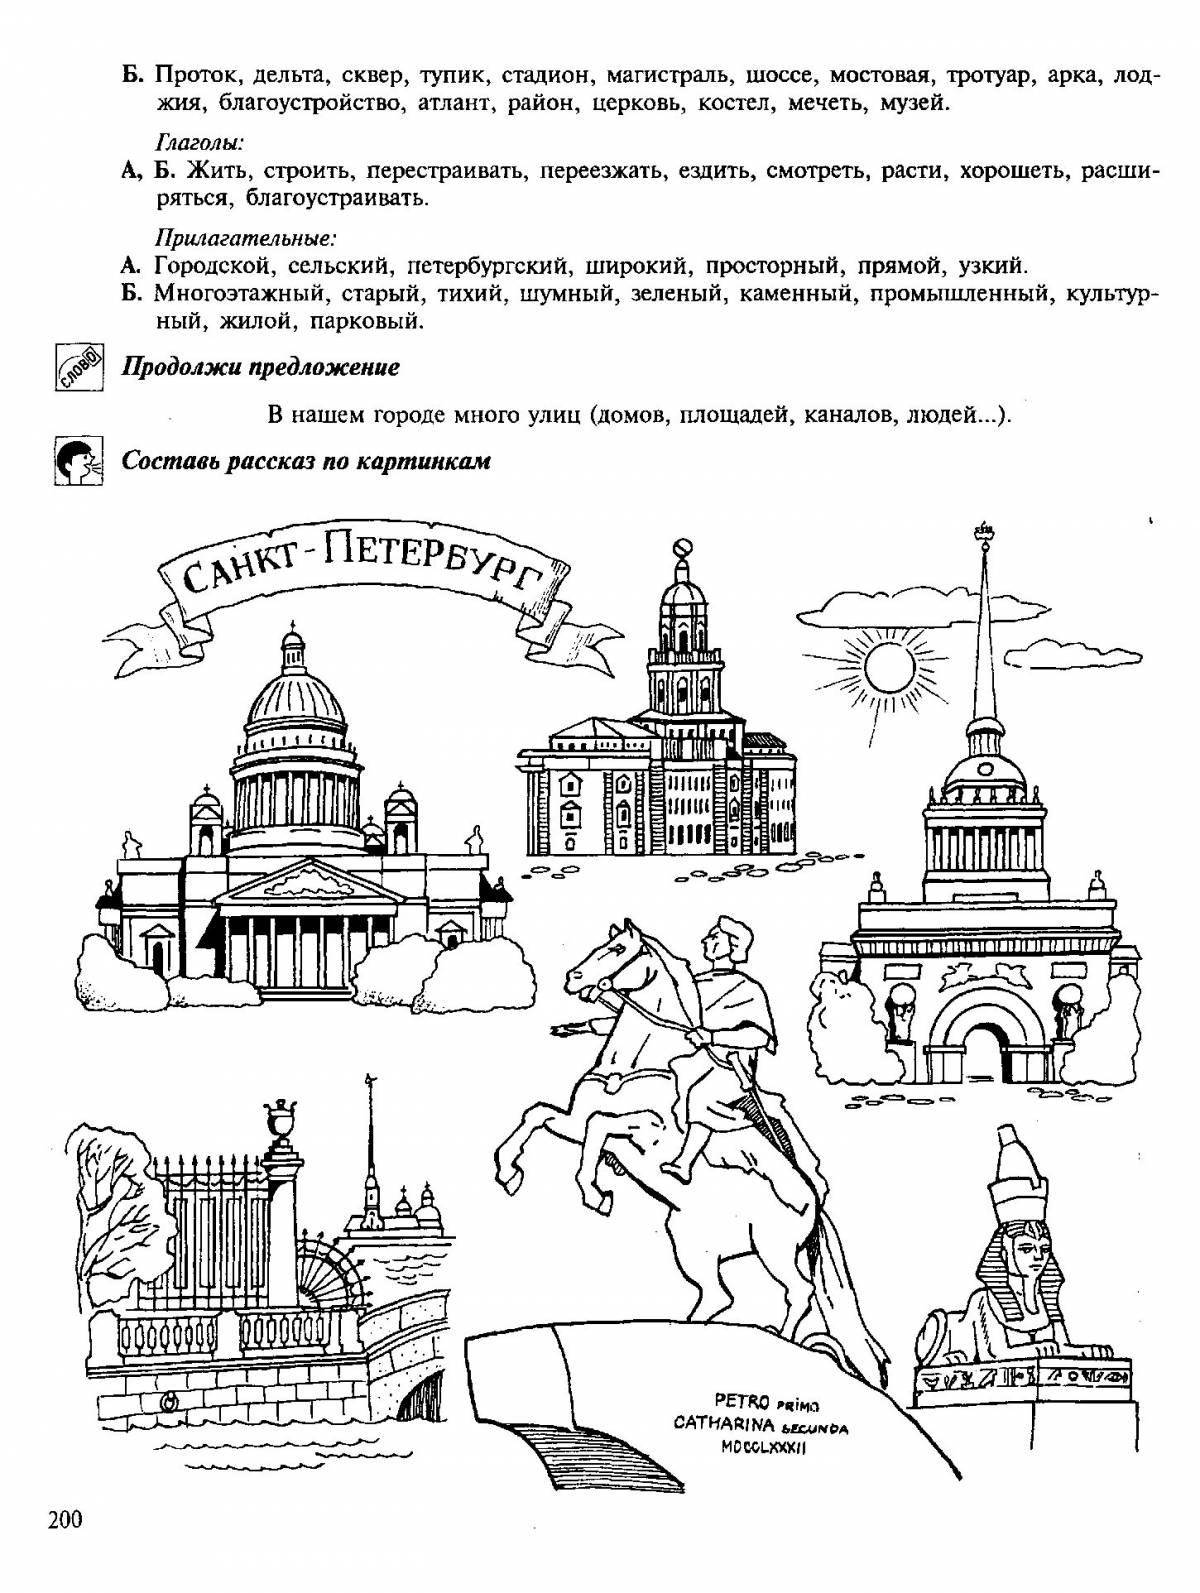 A live admiralty coloring book for kids